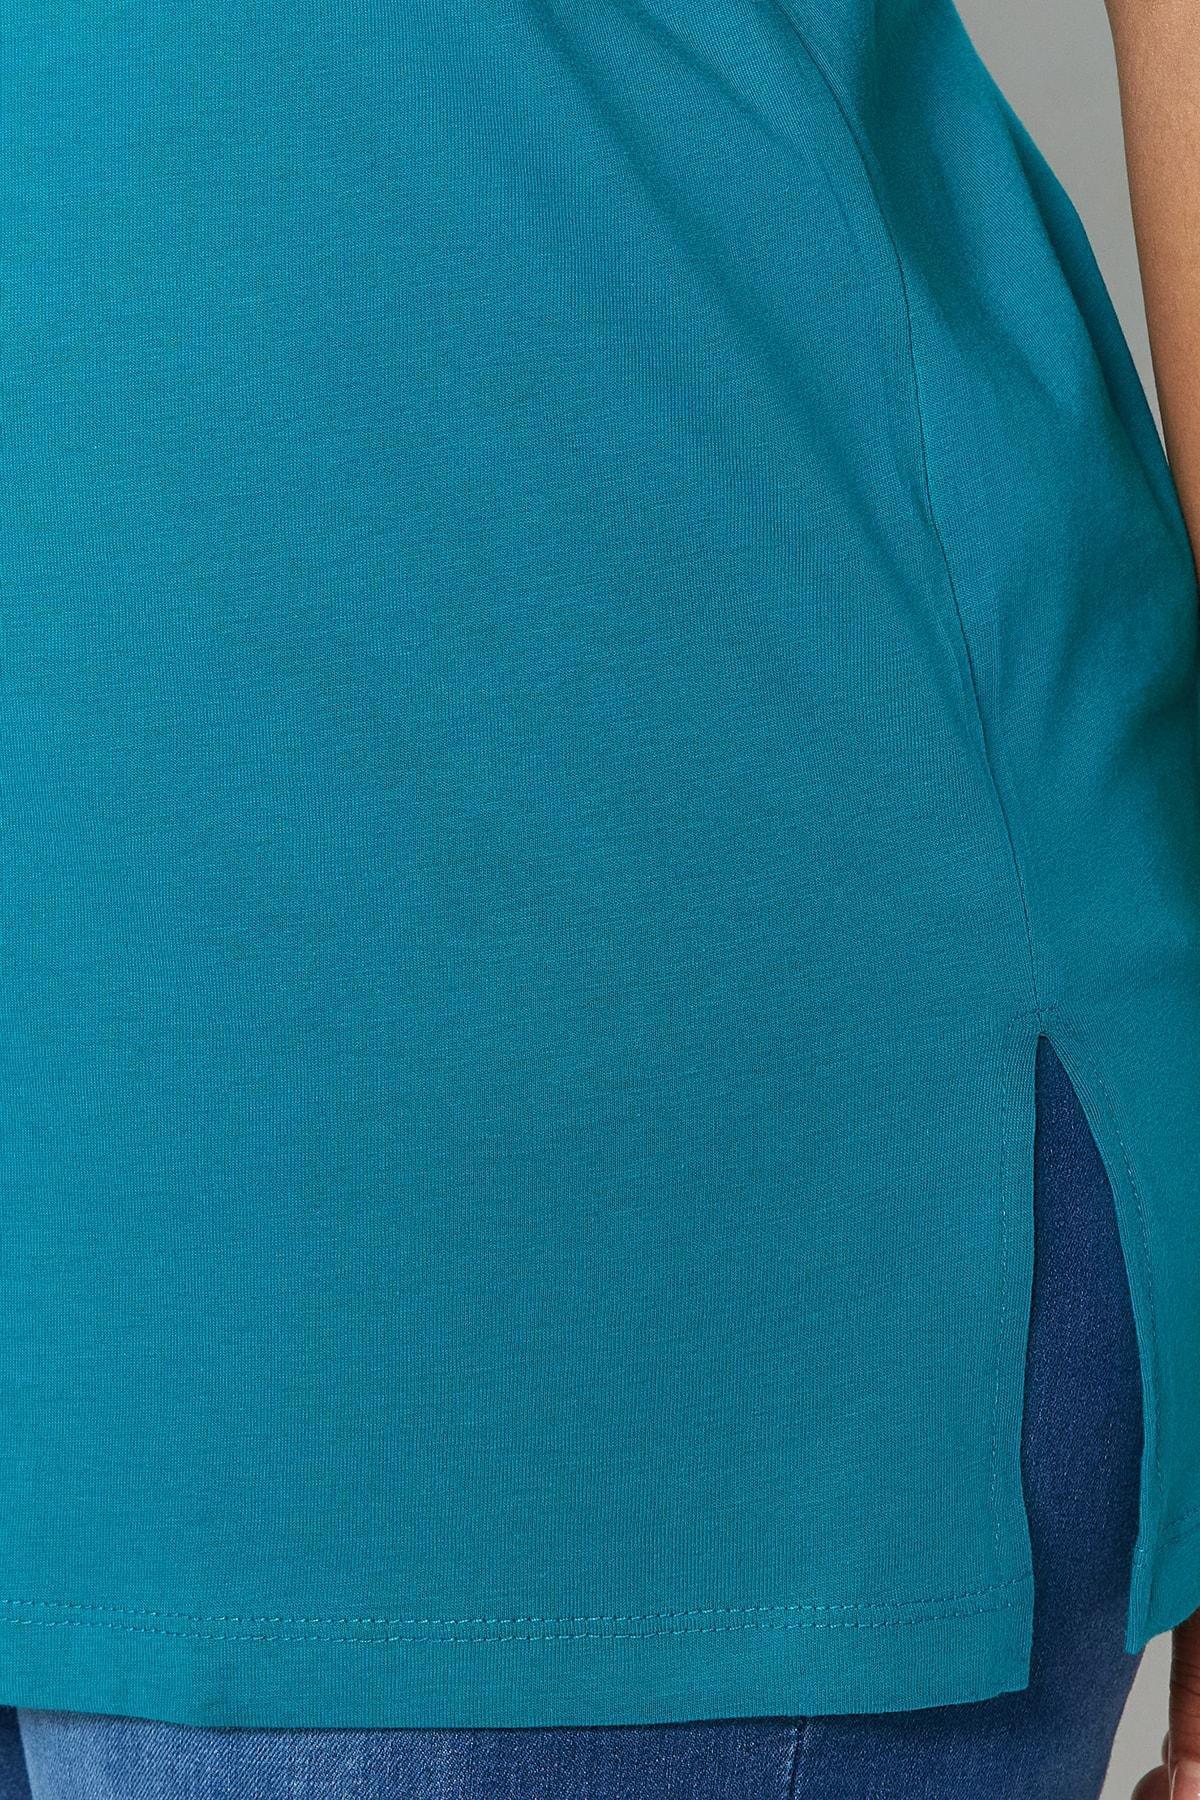 Trendyol - Blue Relaxed Plus Size T-Shirt